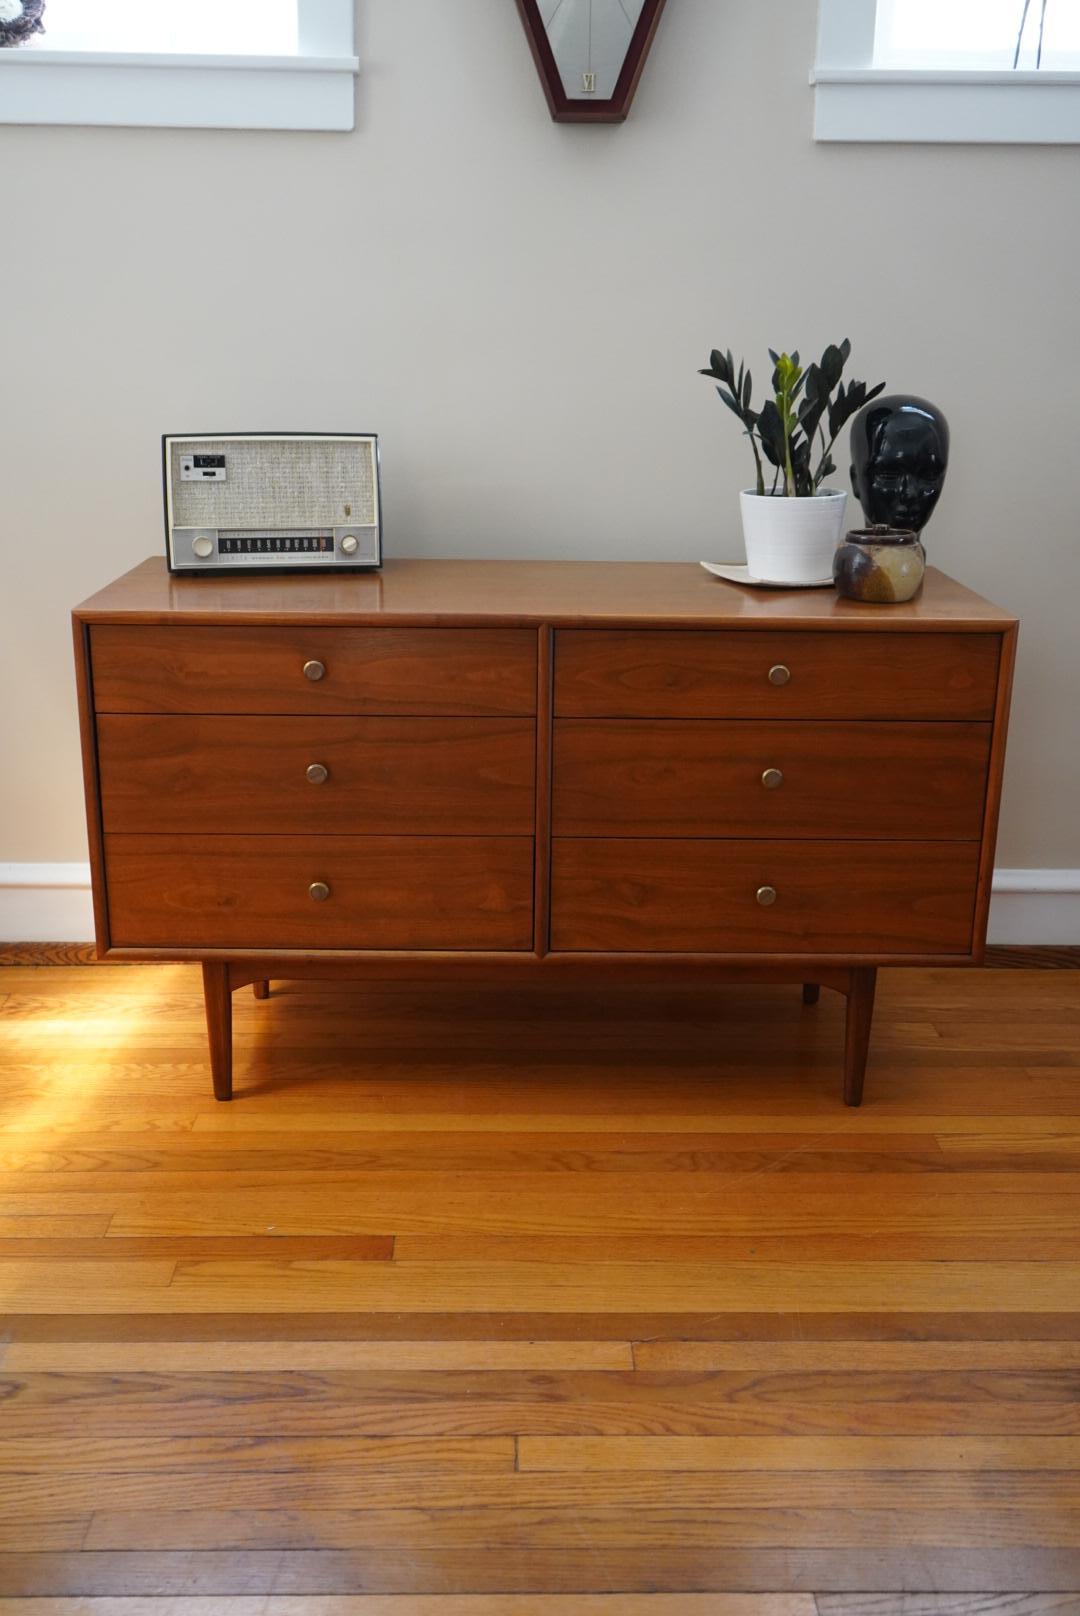 Elevate your bedroom with the timeless style of this Mid-Century Modern 6 drawer dresser from the Drexel Declaration line. The sleek and sophisticated design features clean lines and a warm wood finish that complements any decor. Each of the six